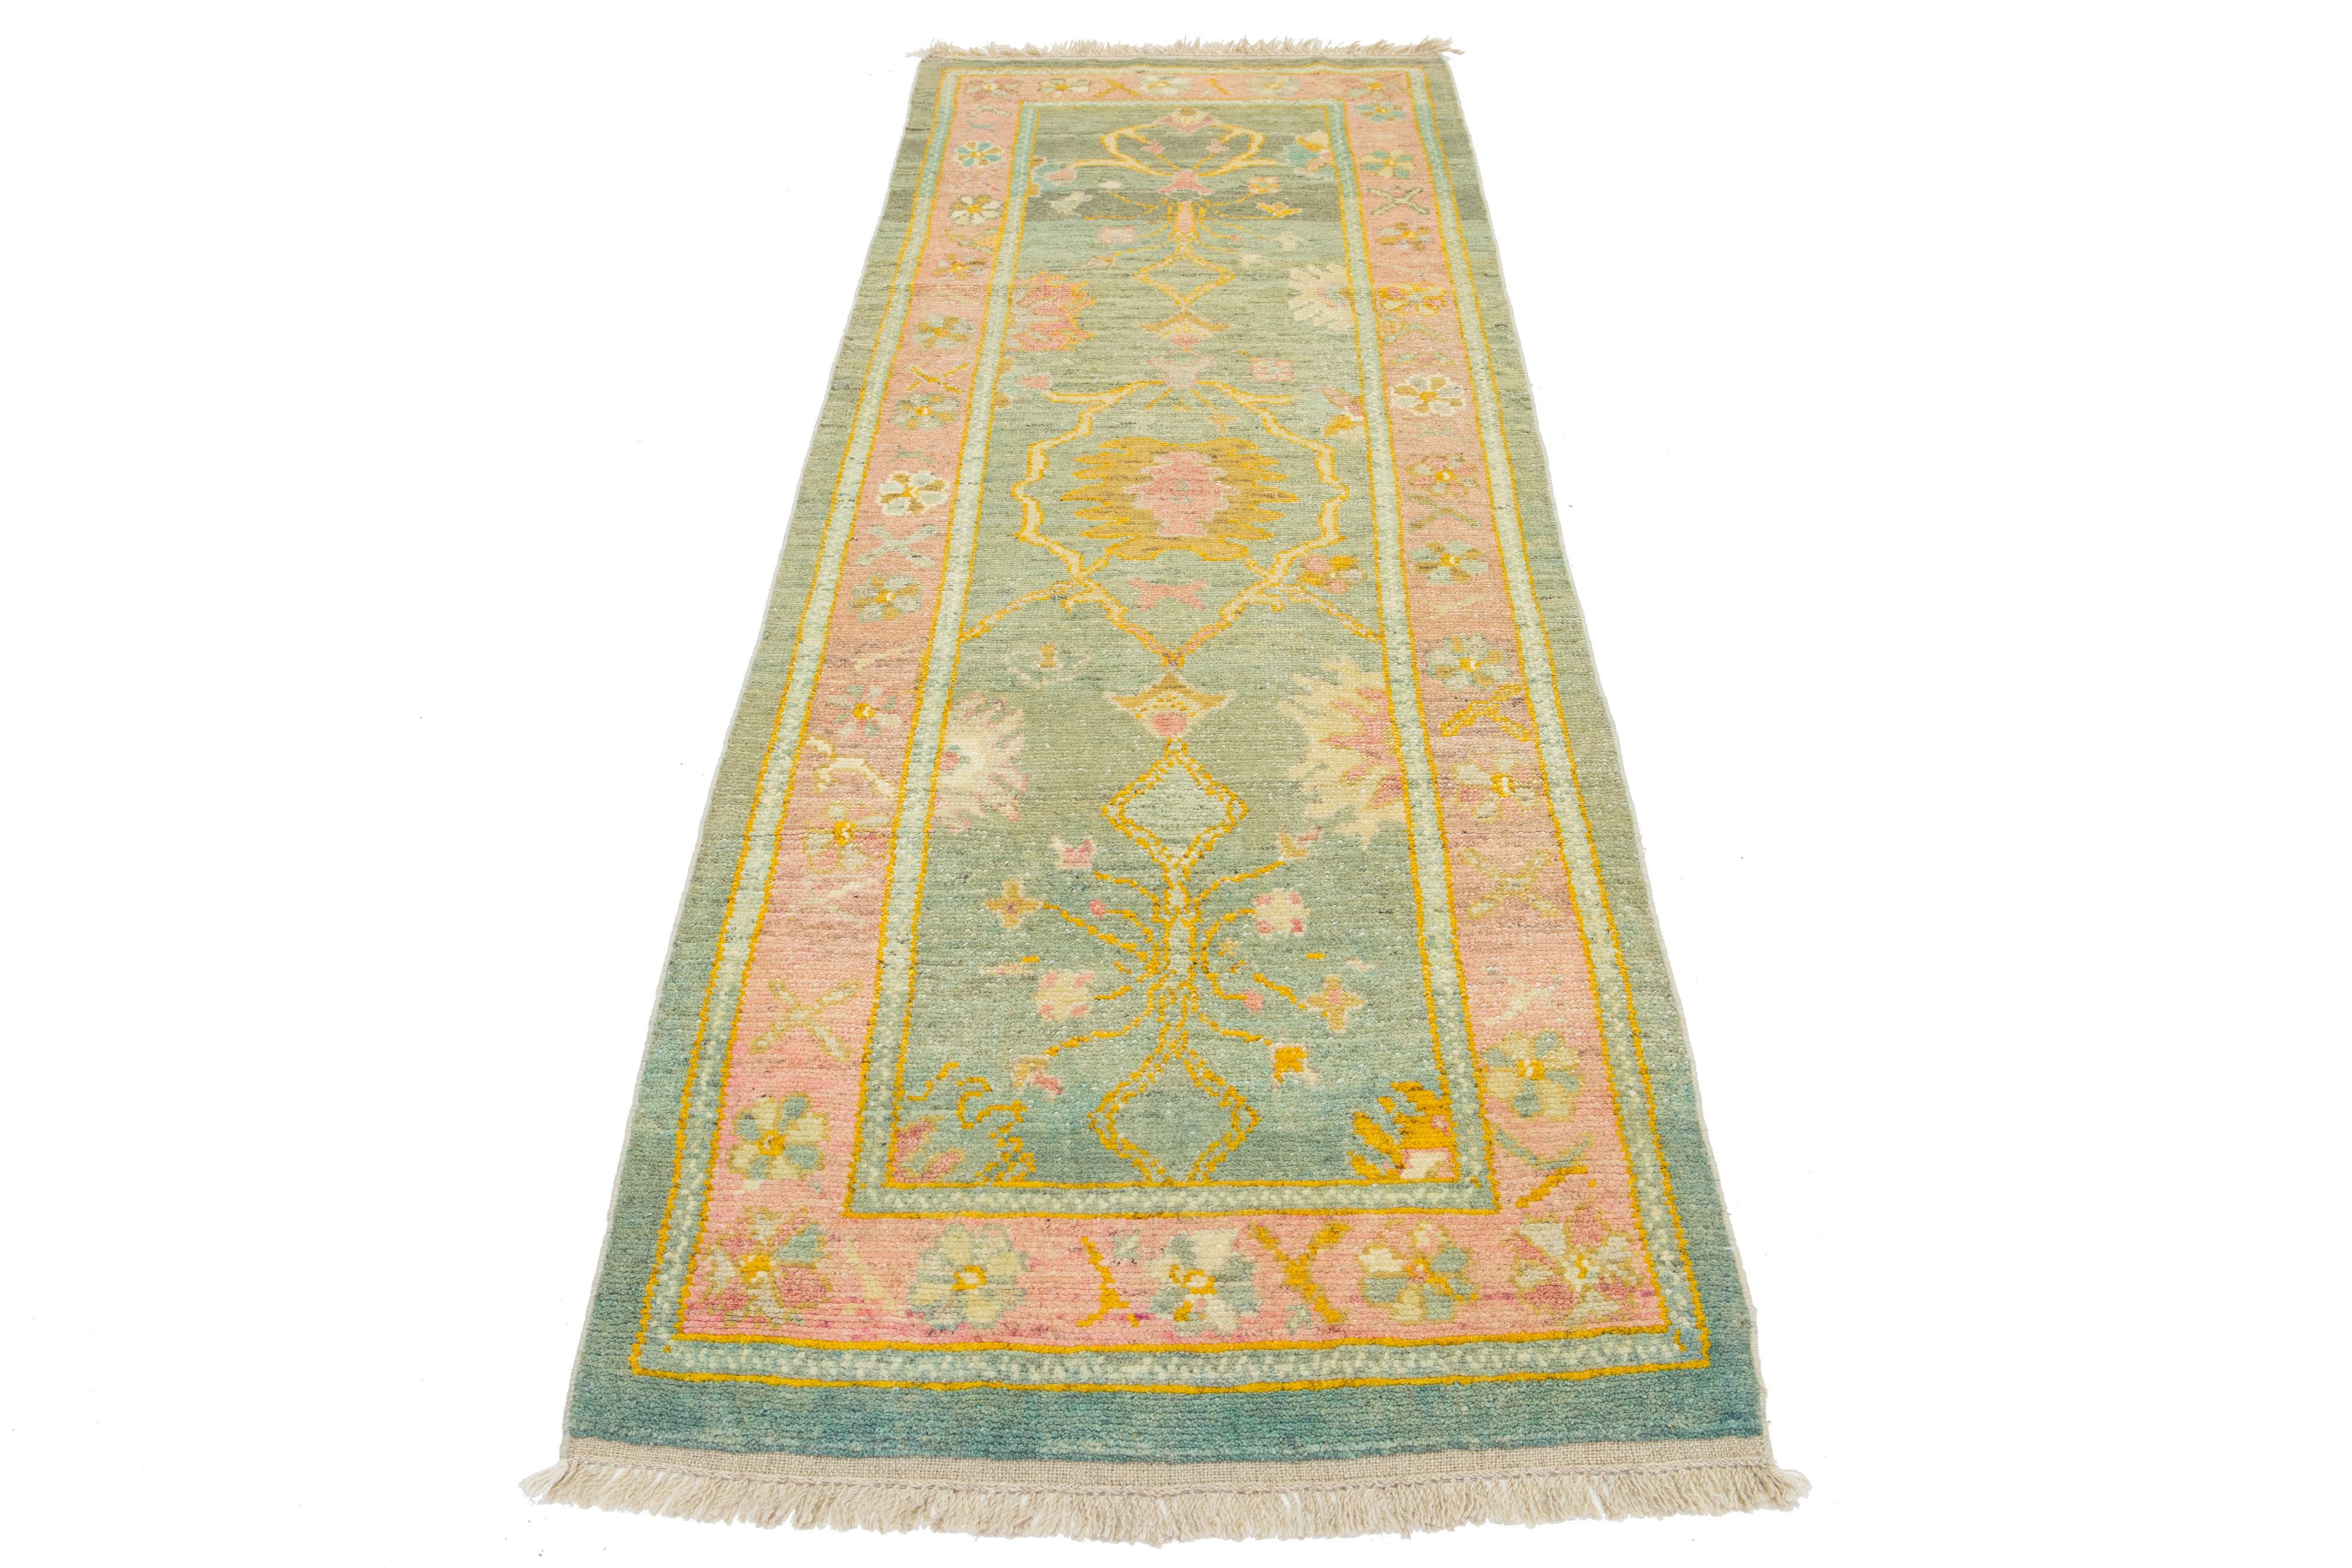 Beautiful modern Oushak hand-knotted wool rug with a green color field. This Turkish Piece has a pink frame with yellow, orange, pink, and green accent colors in a gorgeous all-over floral design.

This rug measures 3'1